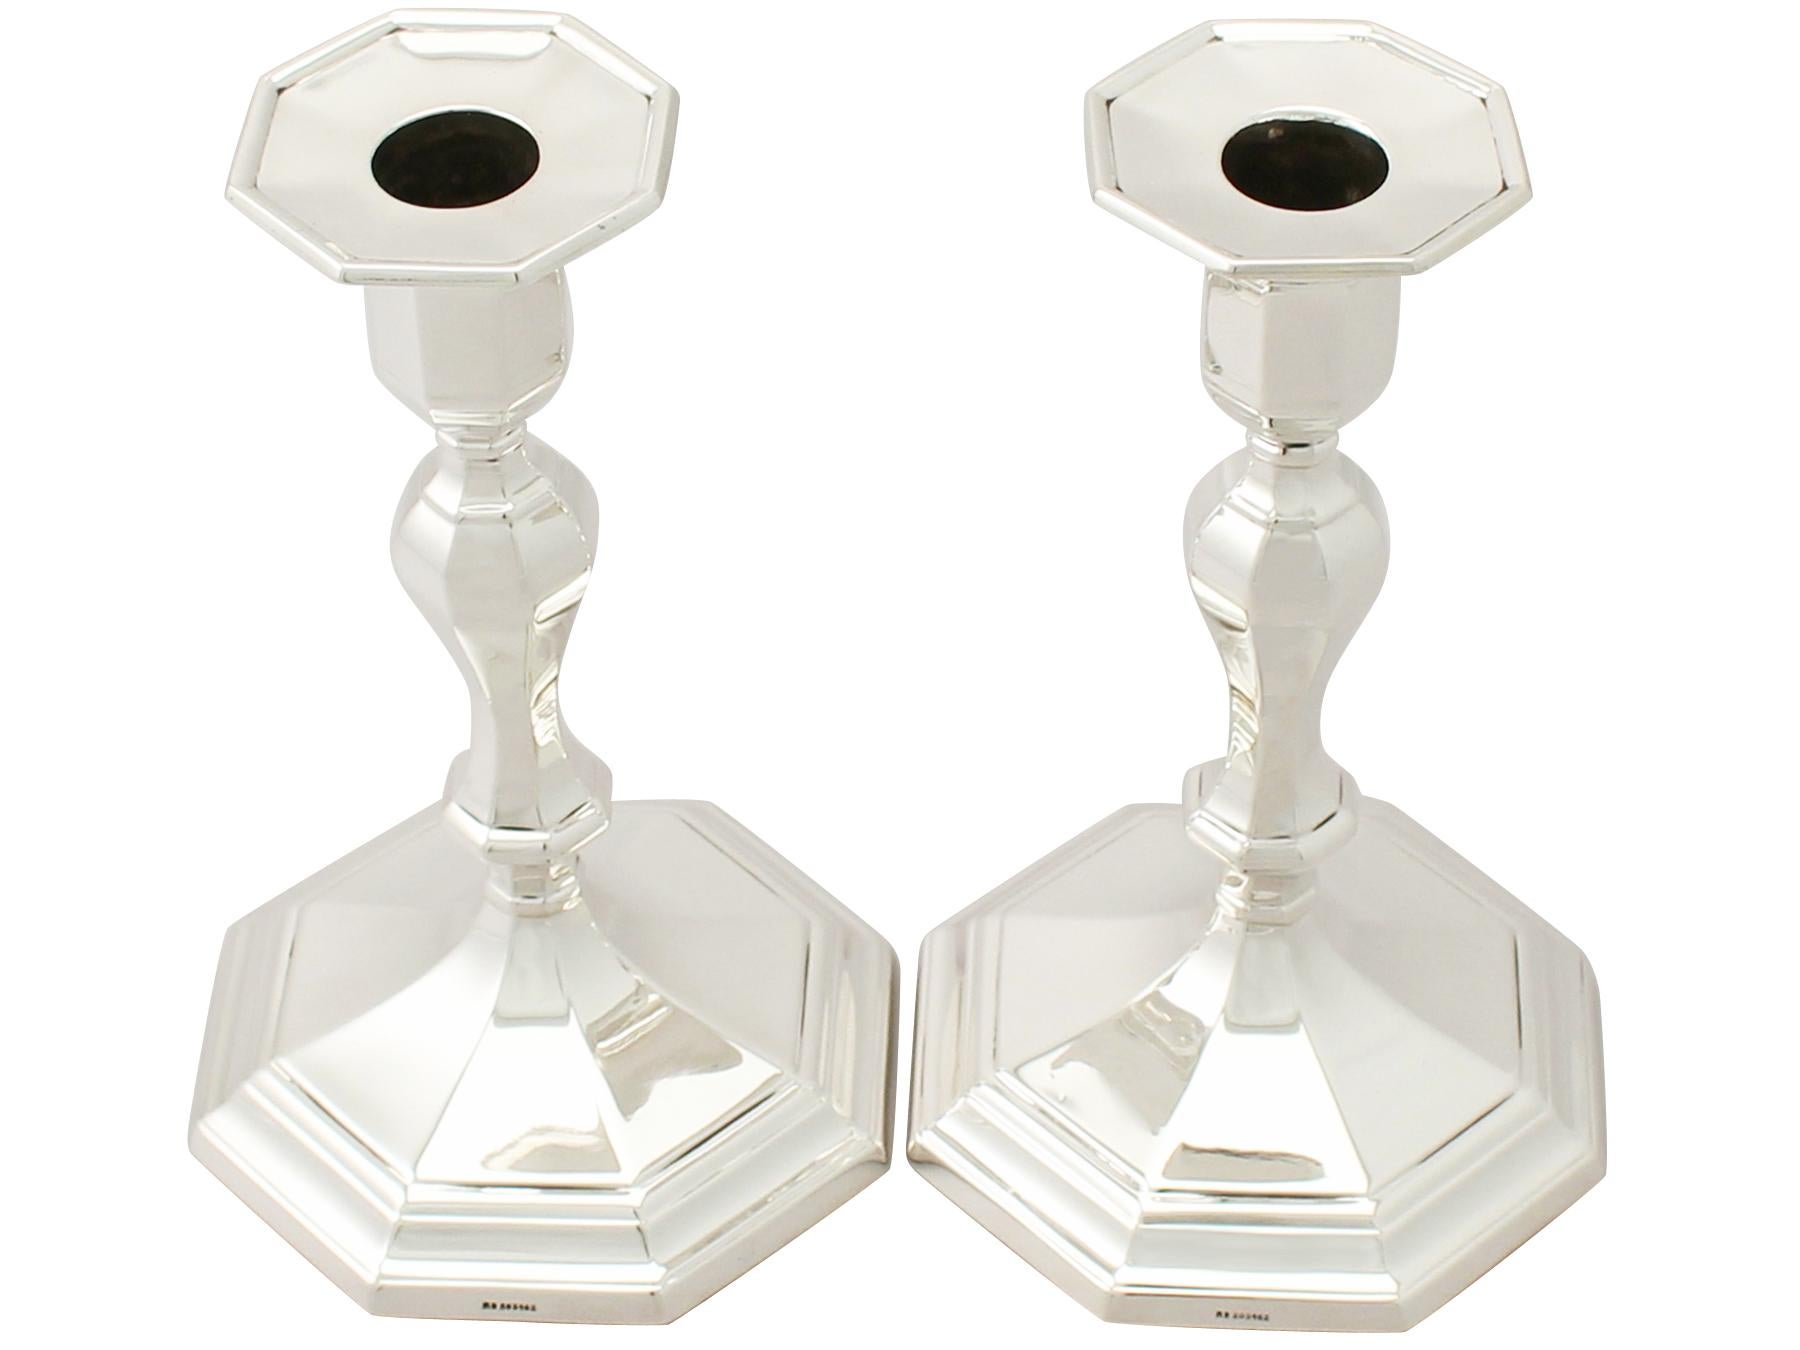 An exceptional, fine and impressive pair of antique Edwardian English sterling silver candlesticks; an addition to our Edwardian silverware collection.

These exceptional antique Edwardian sterling silver candlesticks have a plain octagonal form